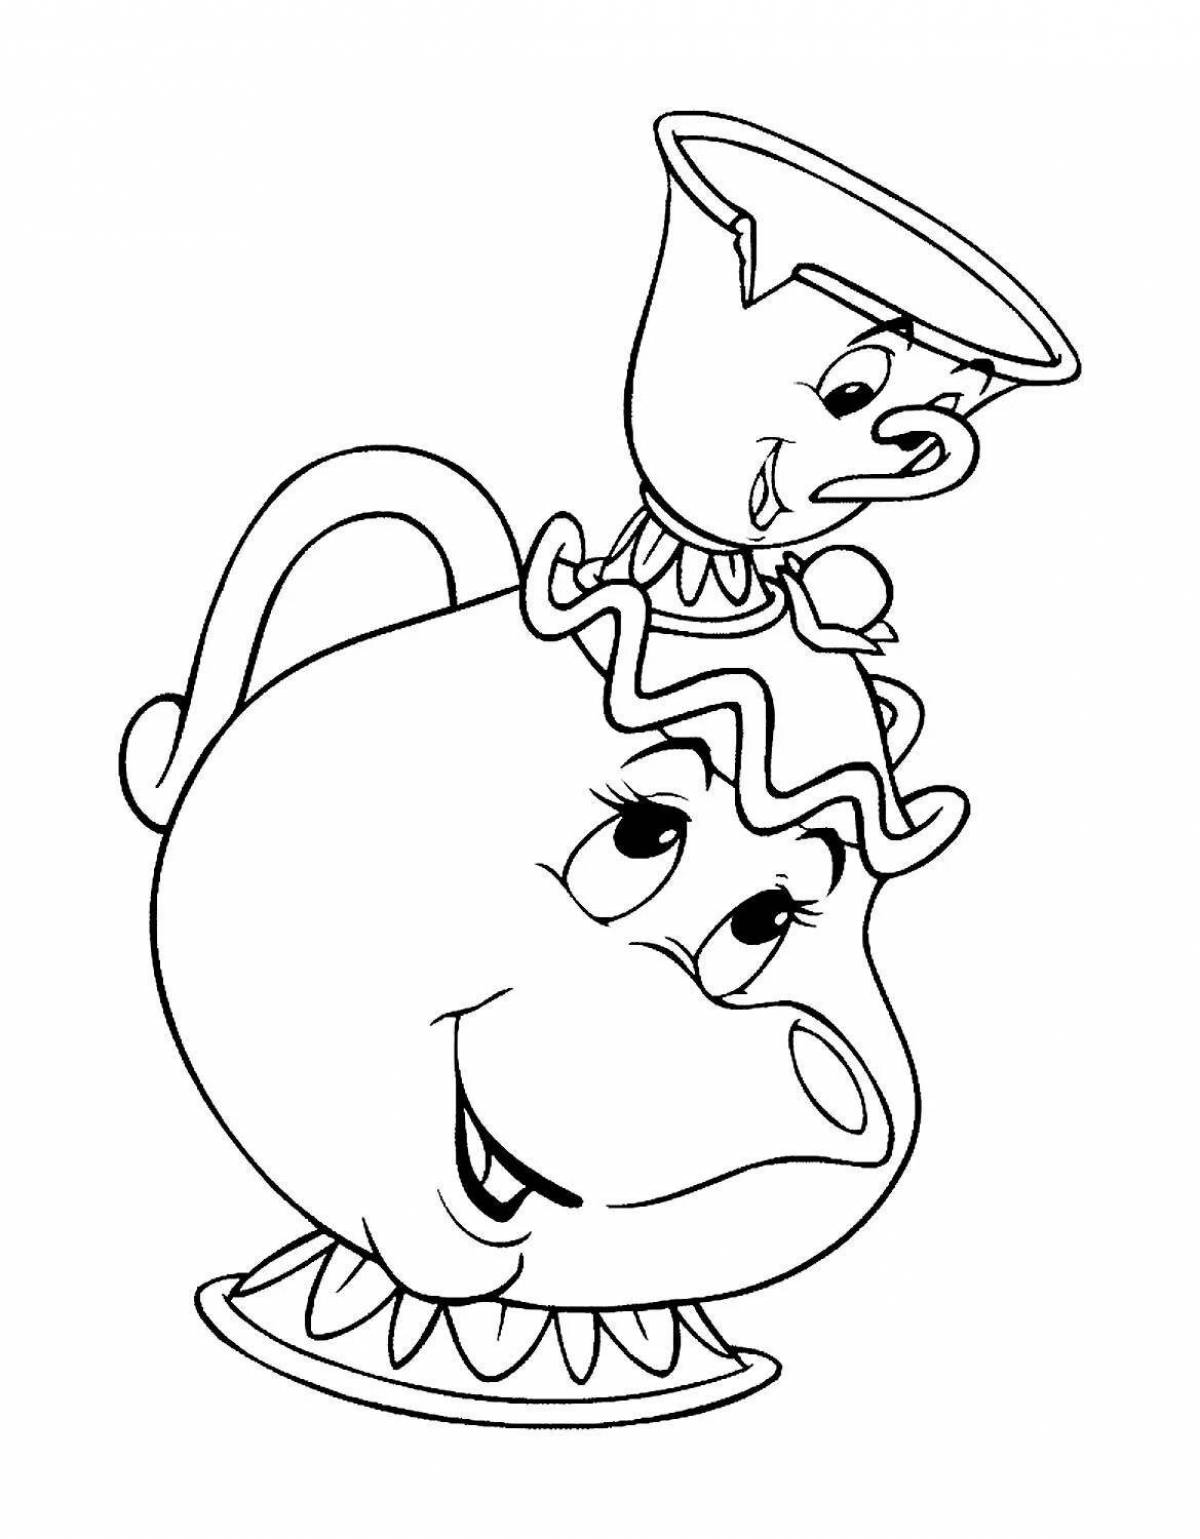 Coloring pages with fun cartoon characters for kids